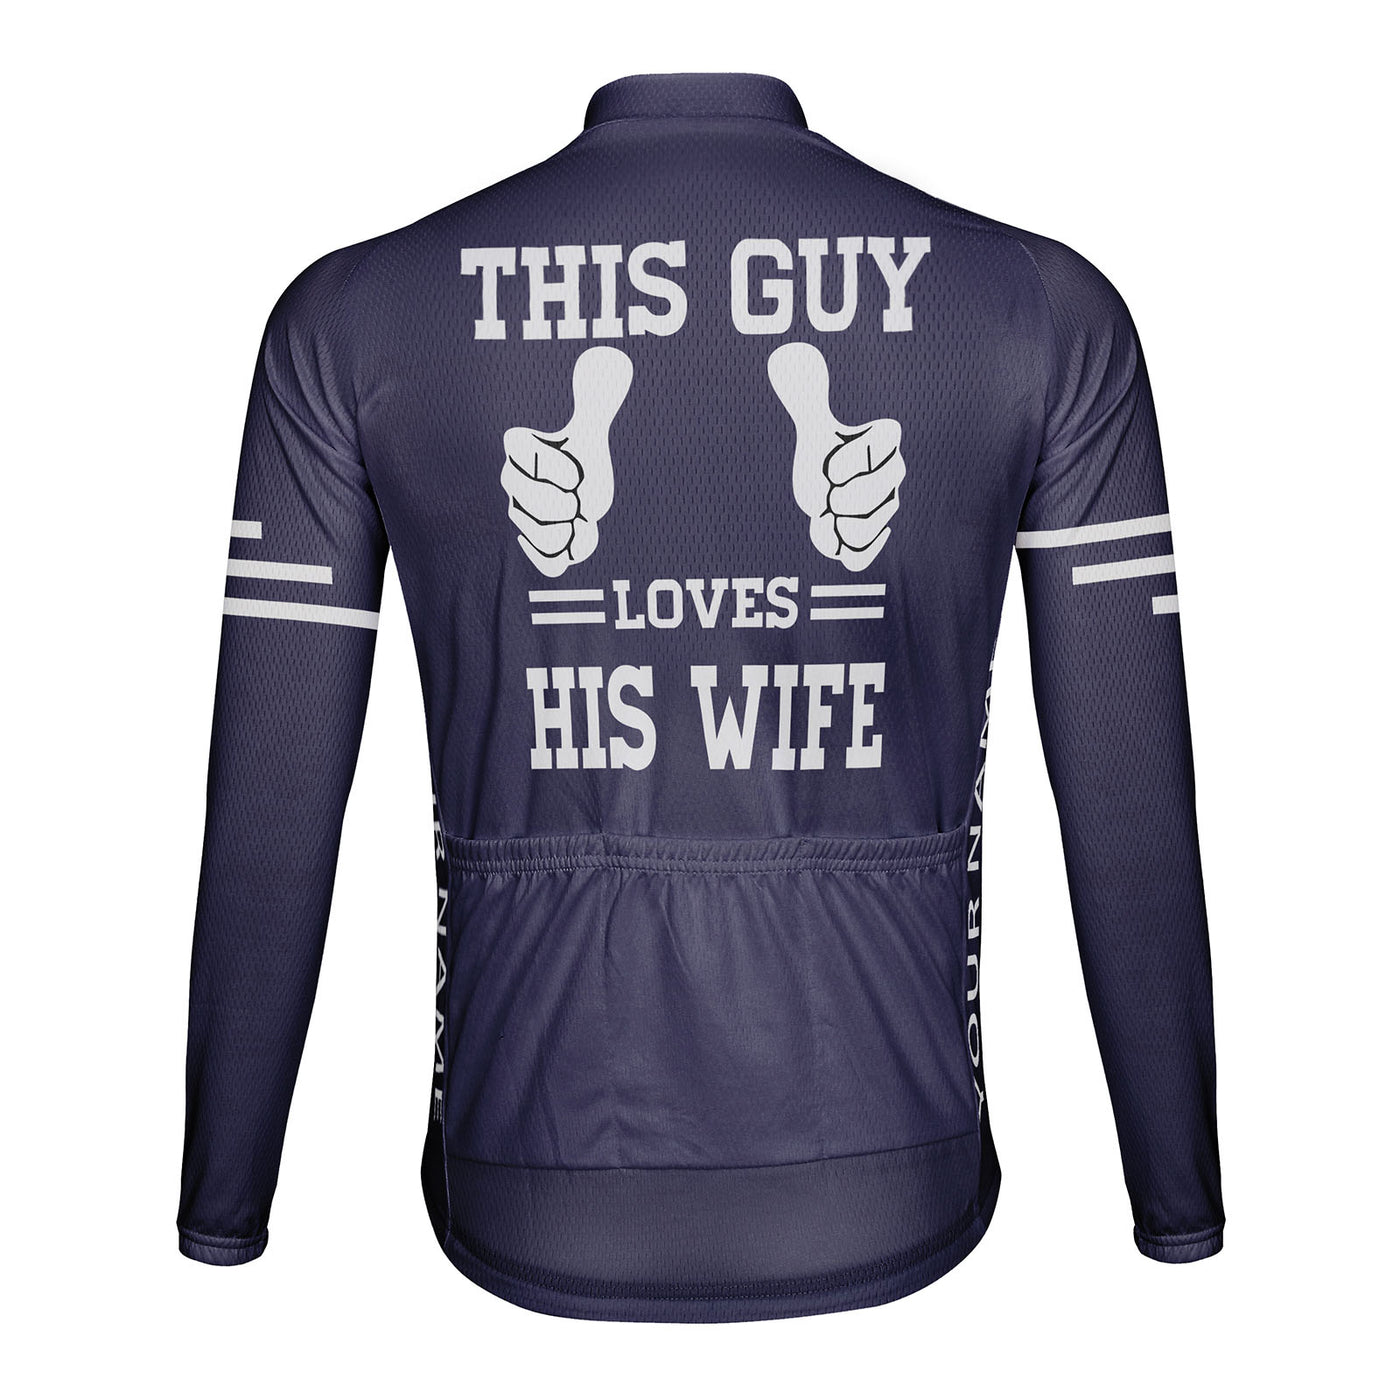 Customized This Guy Loves His Wife Men's Cycling Jersey Long Sleeve